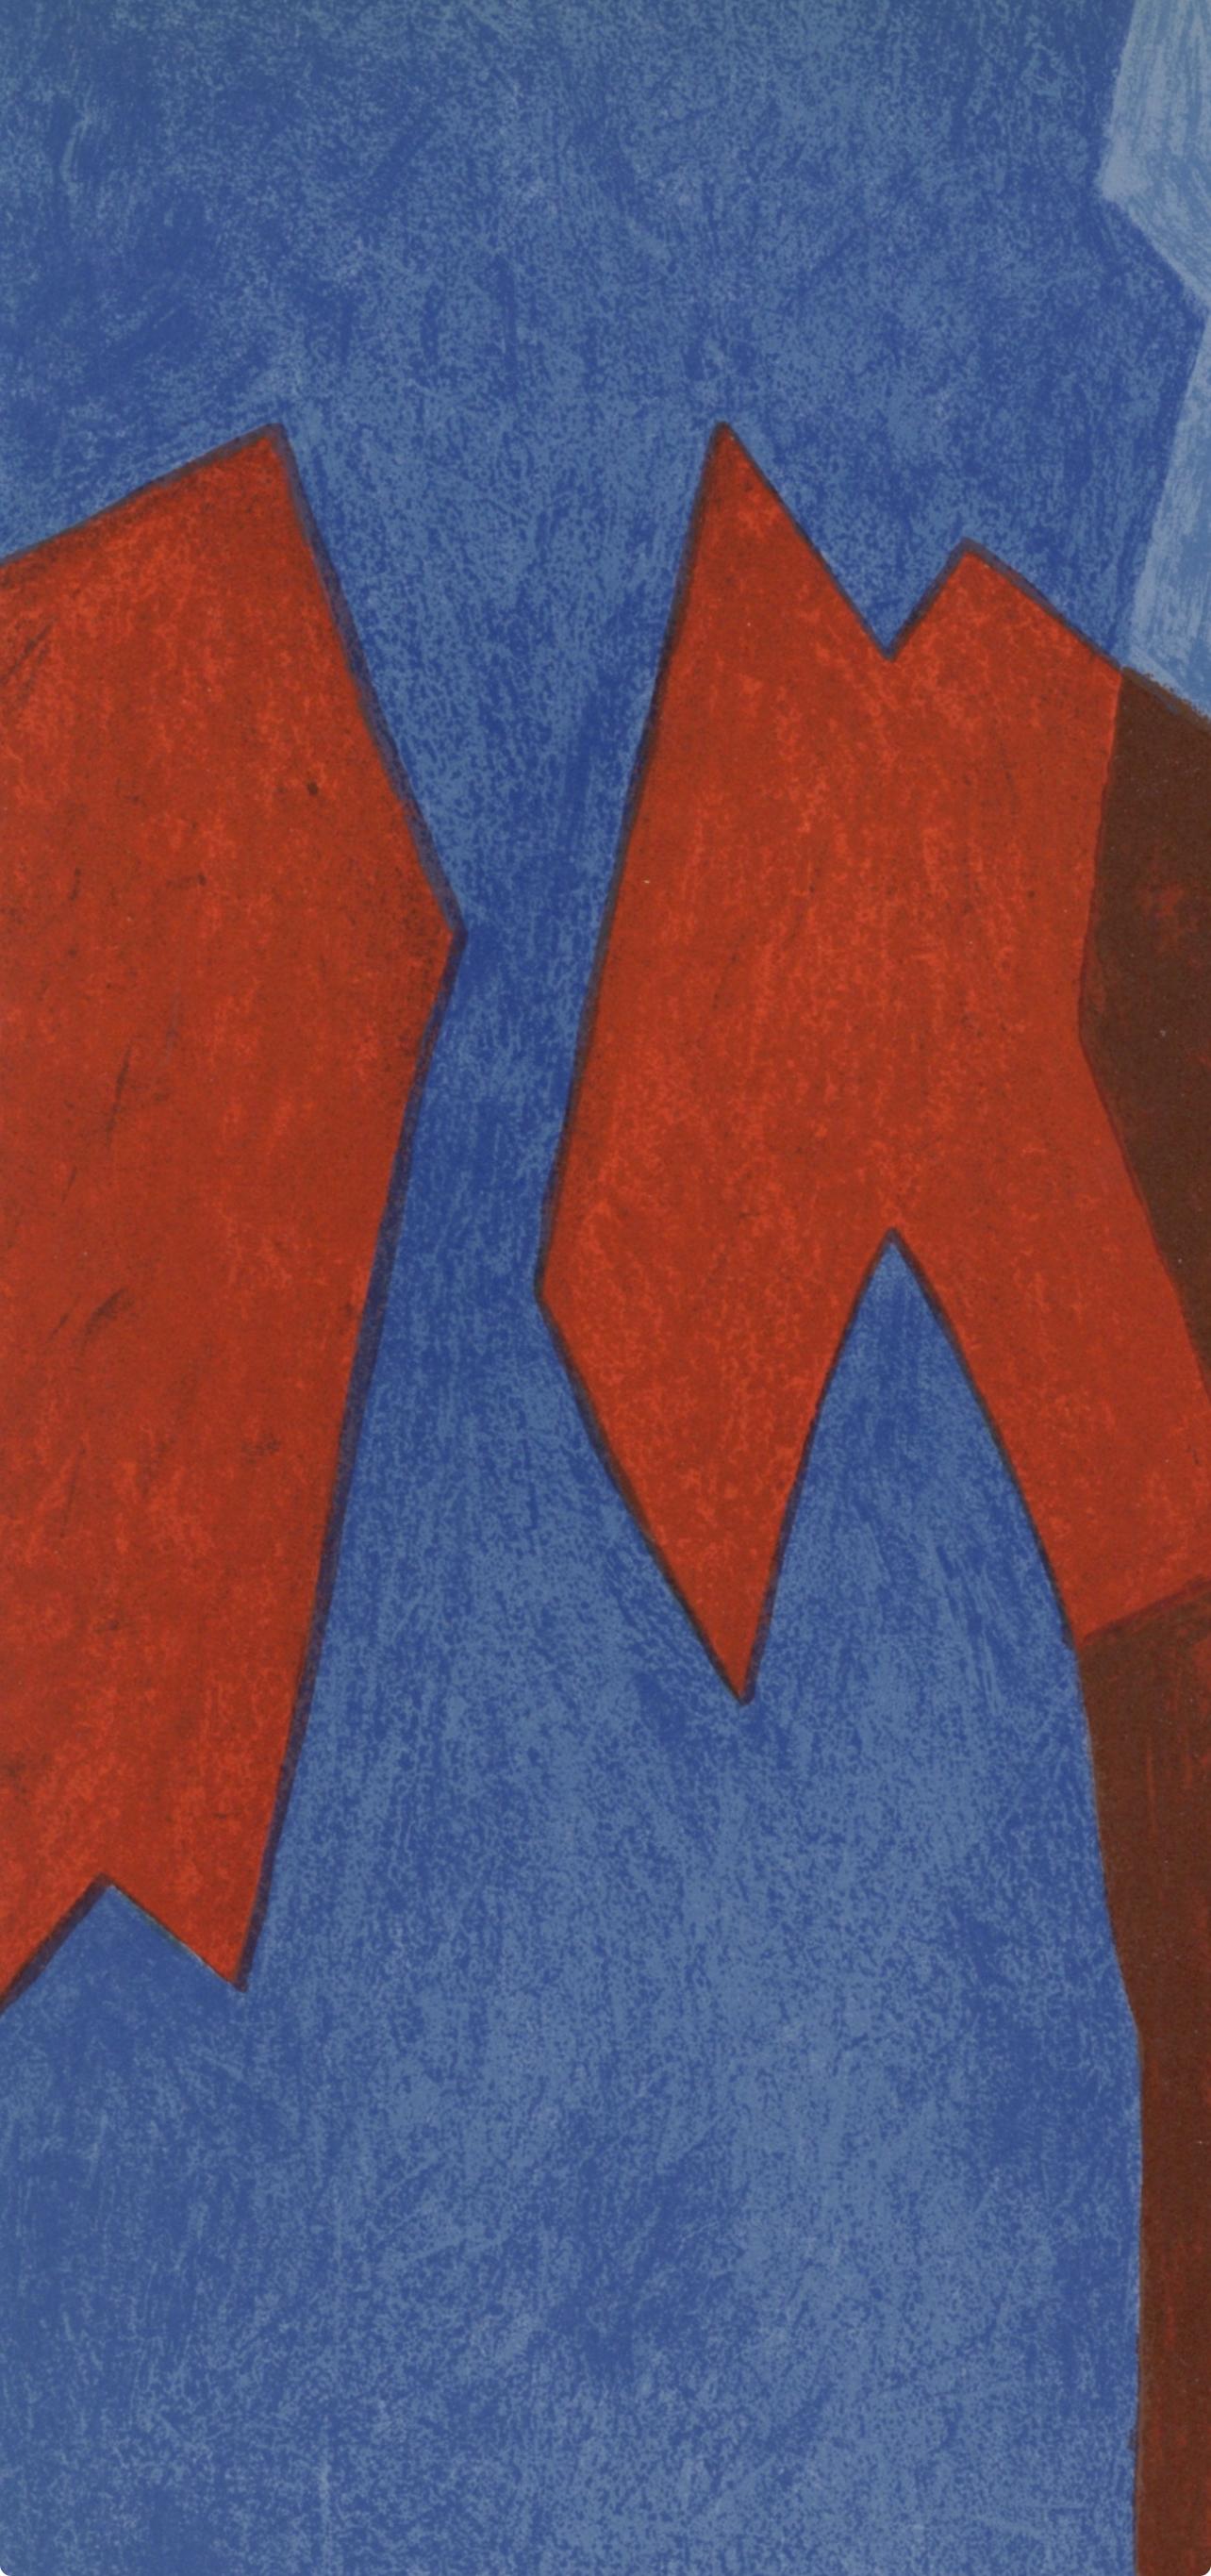 Poliakoff, Composition rouge/bleu (Poliakoff/Schneider 68), XXe Siècle (after) - Print by Serge Poliakoff